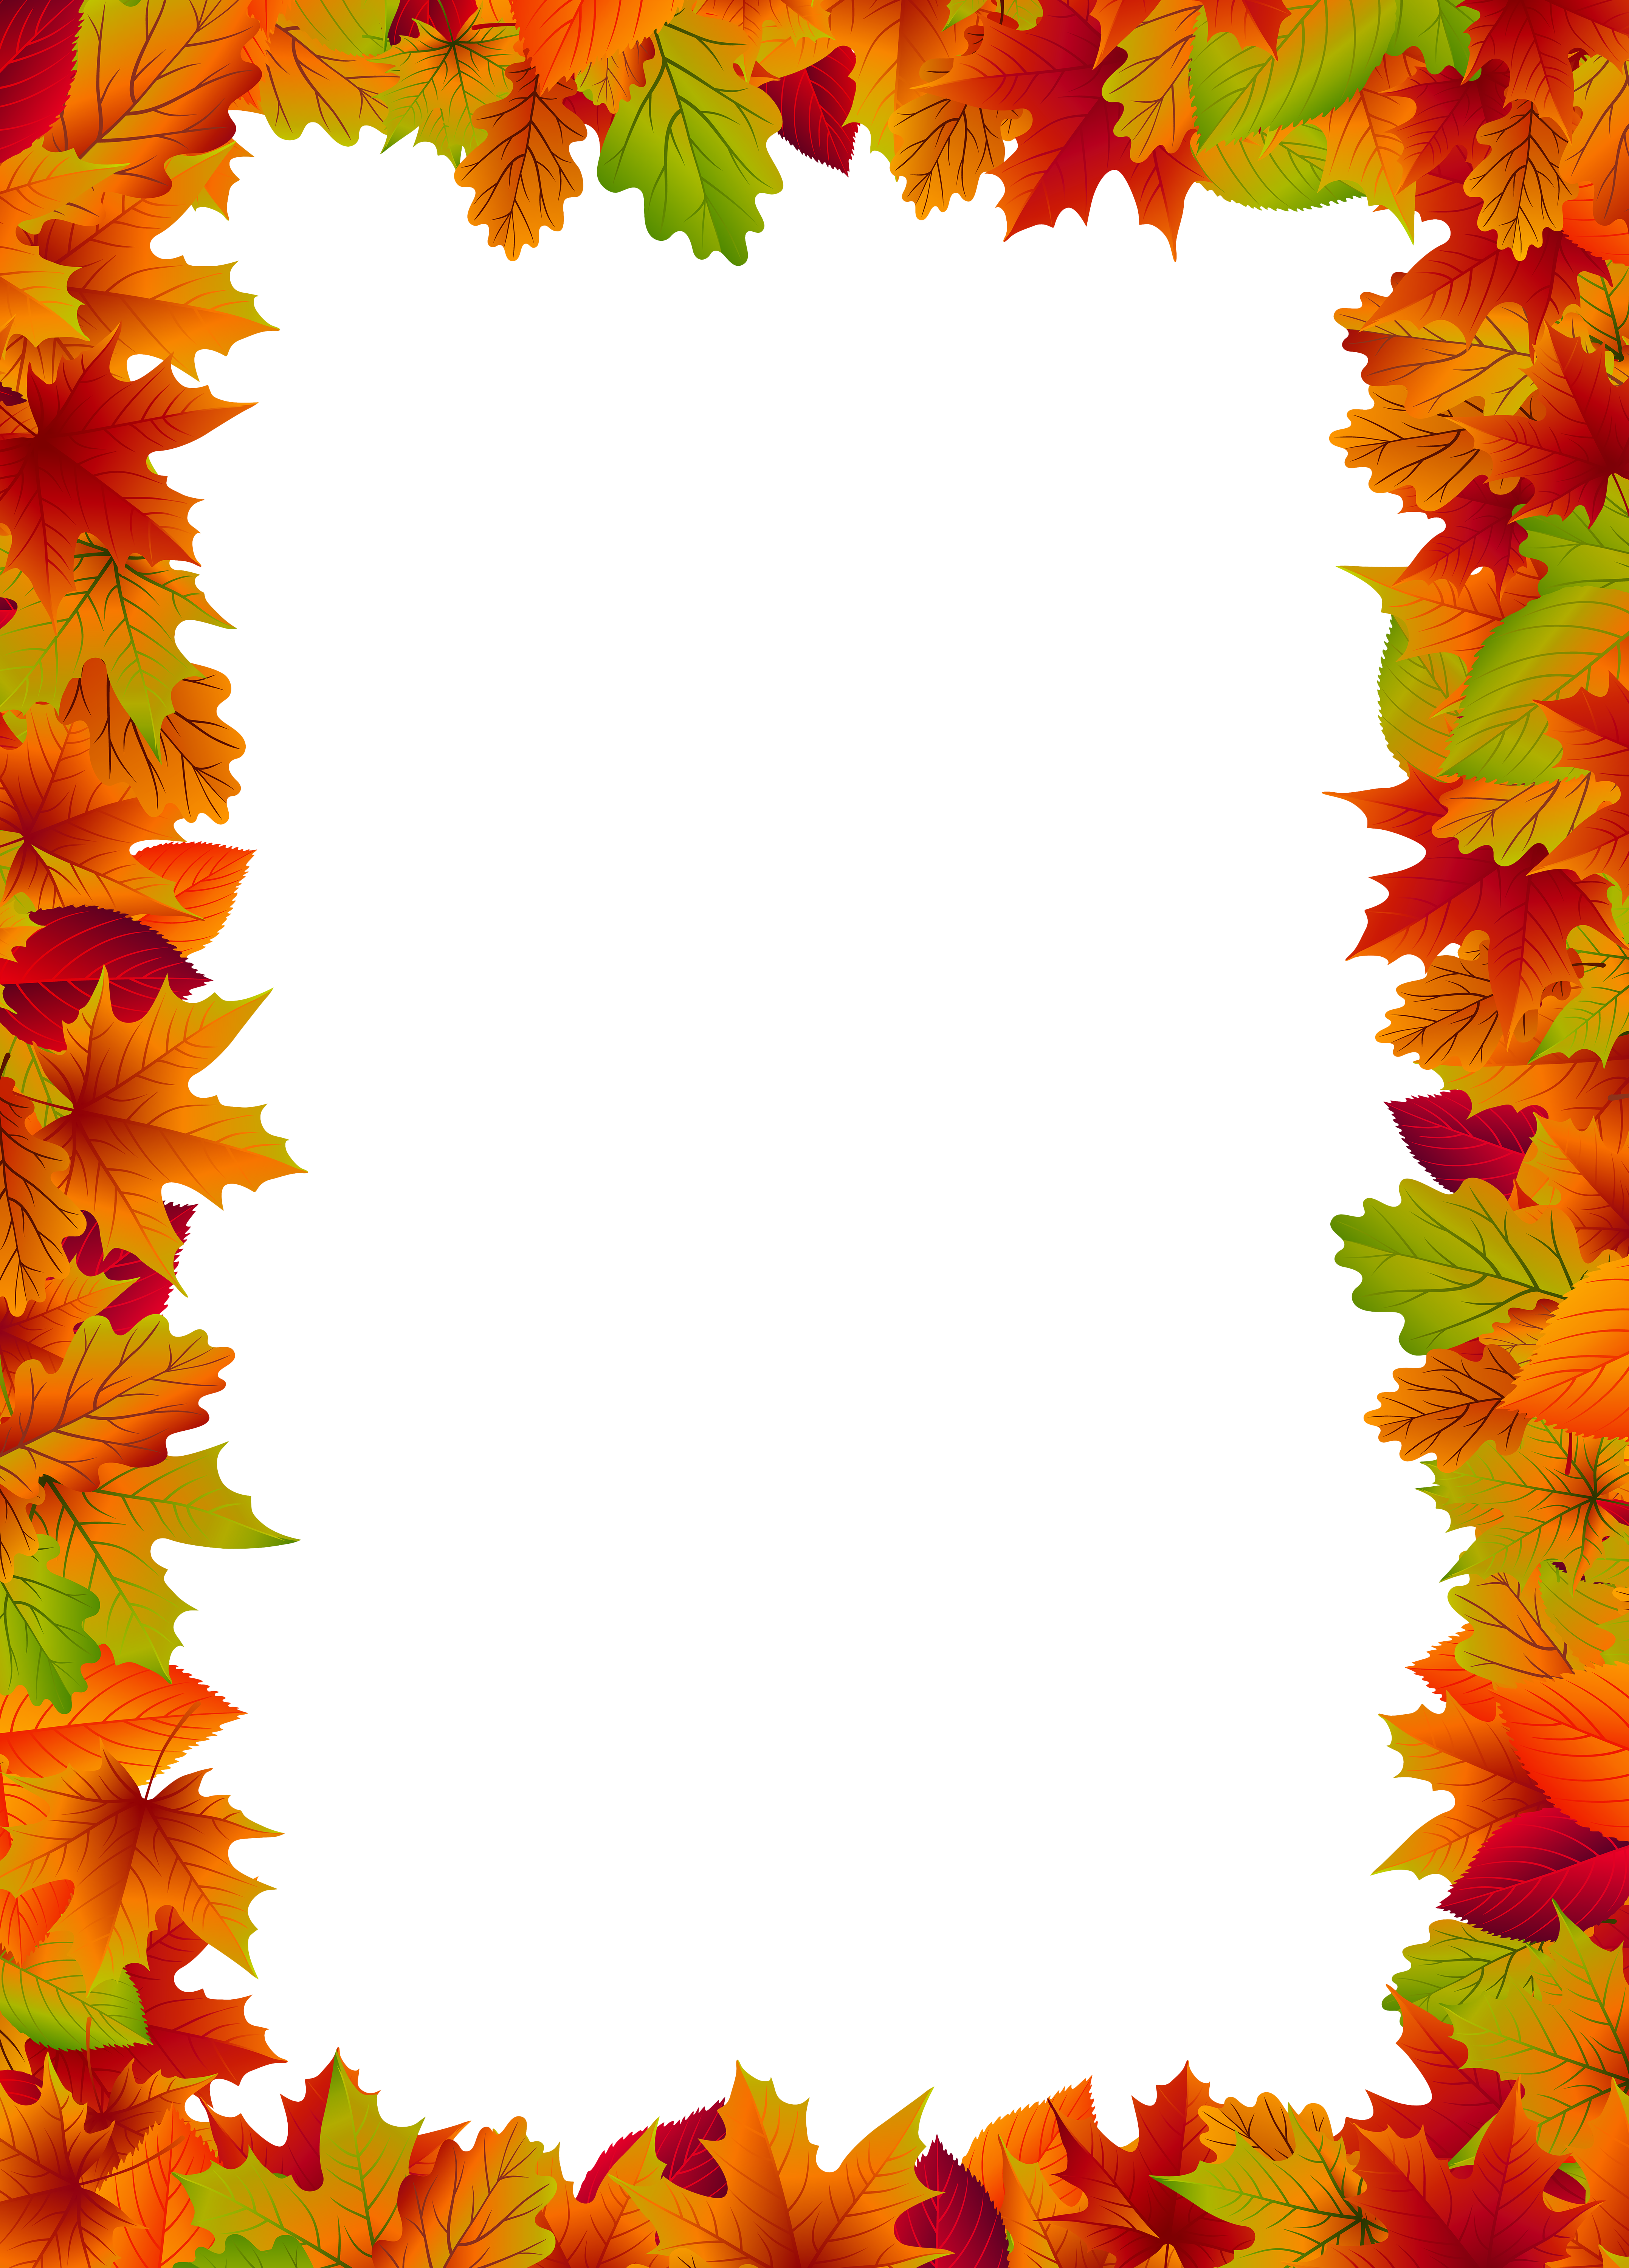 Fall Border Frame PNG Clip Art Image​-Quality Image and Transparent PNG Free Clipart